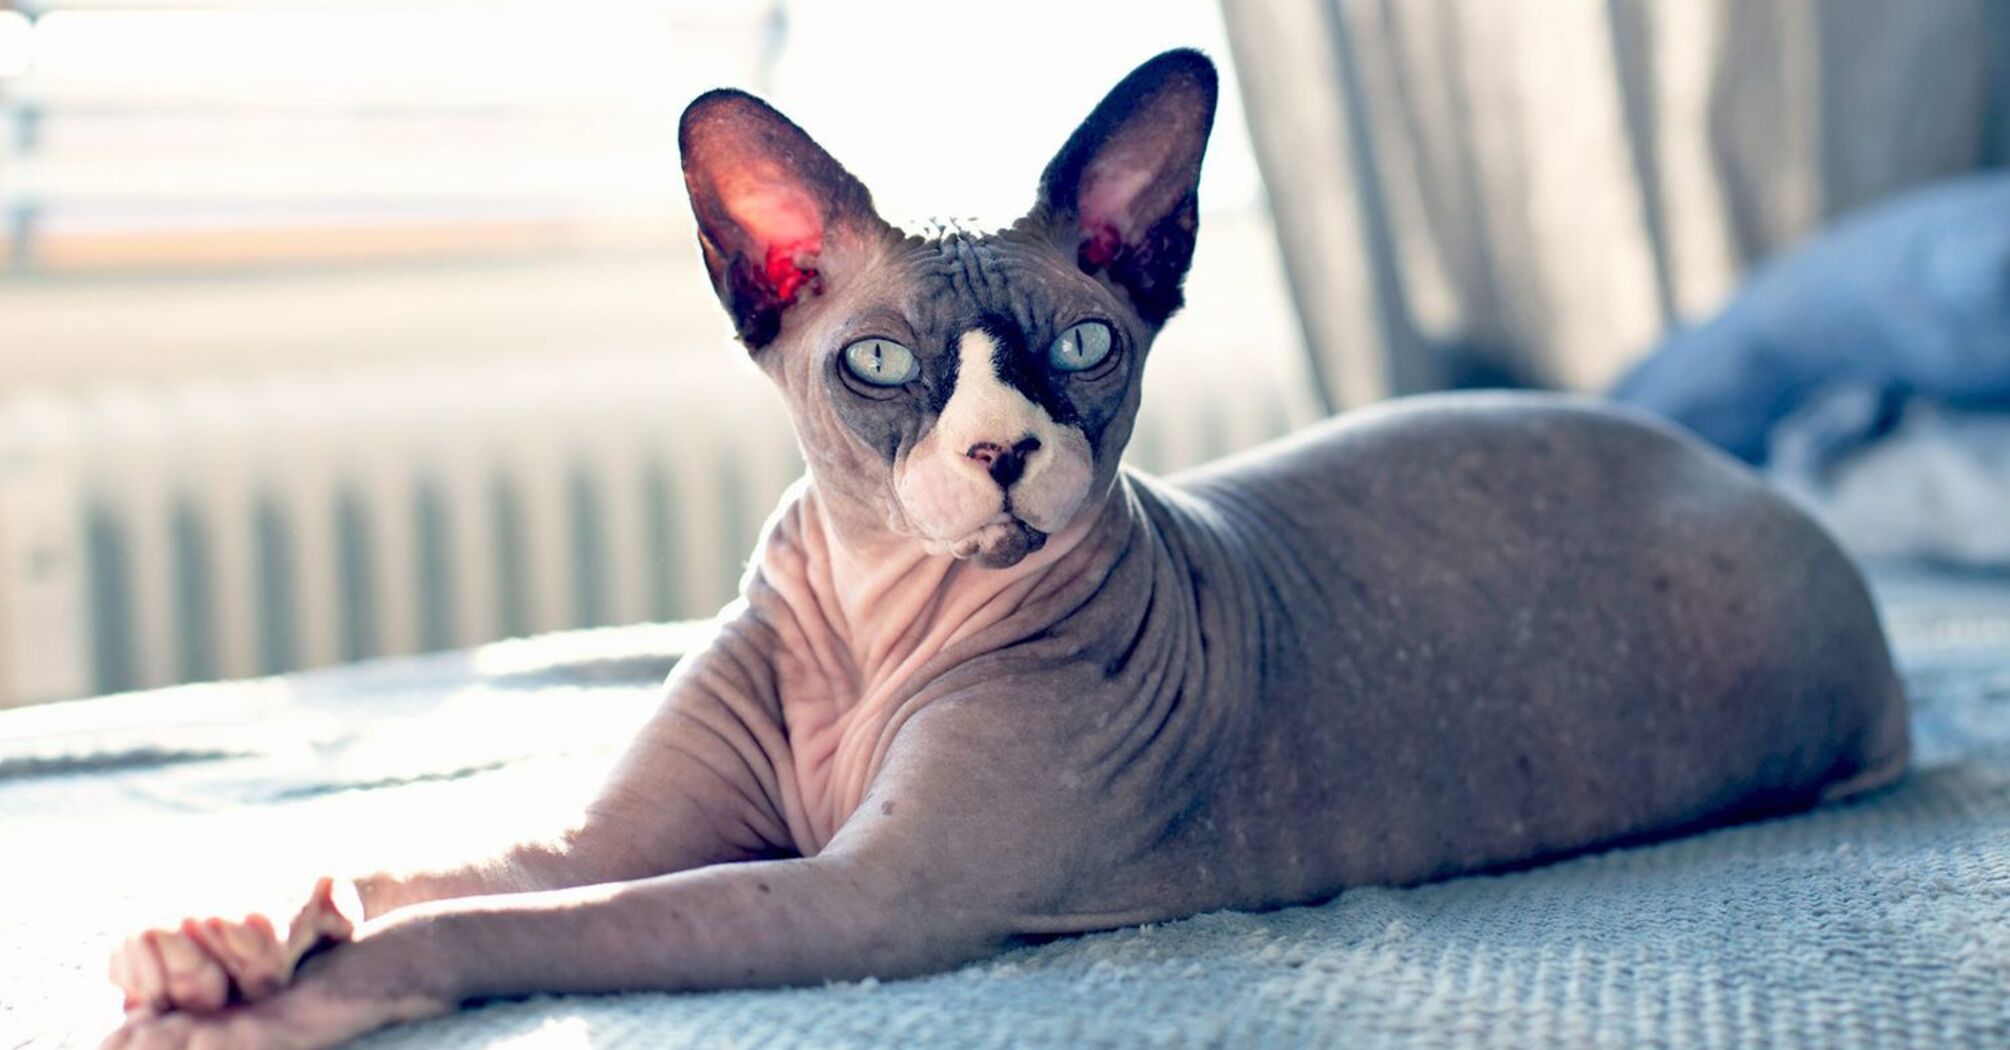 Features of the Sphynx breed